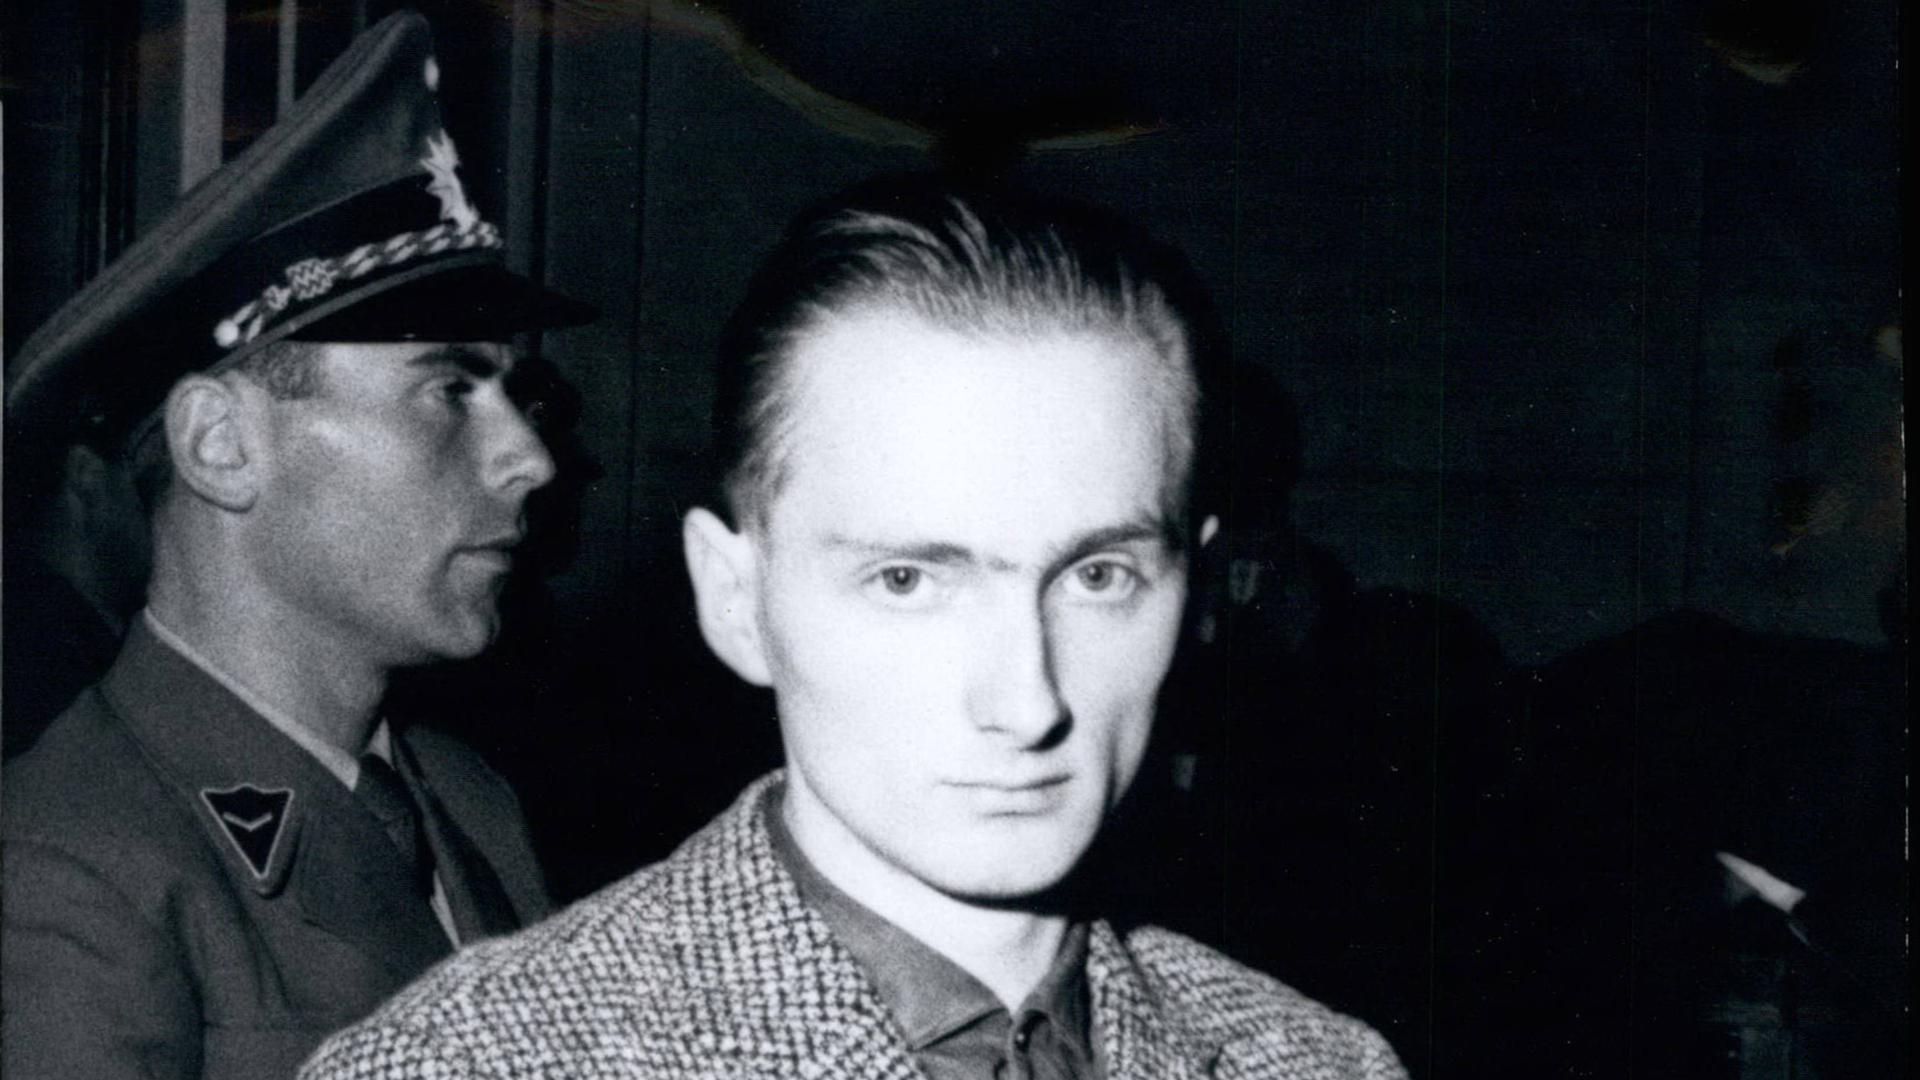  Oct. 10, 1960 - Sexual criminal Pommerenke before the court: The mostly feared sexual criminal of past-war time in Germany, temporary worker Heinrich Pommerenke Heinrich Pommerenke, 23, is since Oct. 3rd questioned before the court in Freiburg/West-Germany. He is accused of 27 crimes, among them four robbery and sexual murders, 10 crimes of tried murder and several robbery attacks, thefts and indecent assaults. On the whole, Pommerenke admitted 65 crimes. Photo shows Heinrich Pommerenke before the court. PUBLICATIONxINxGERxONLY - ZUMAk09